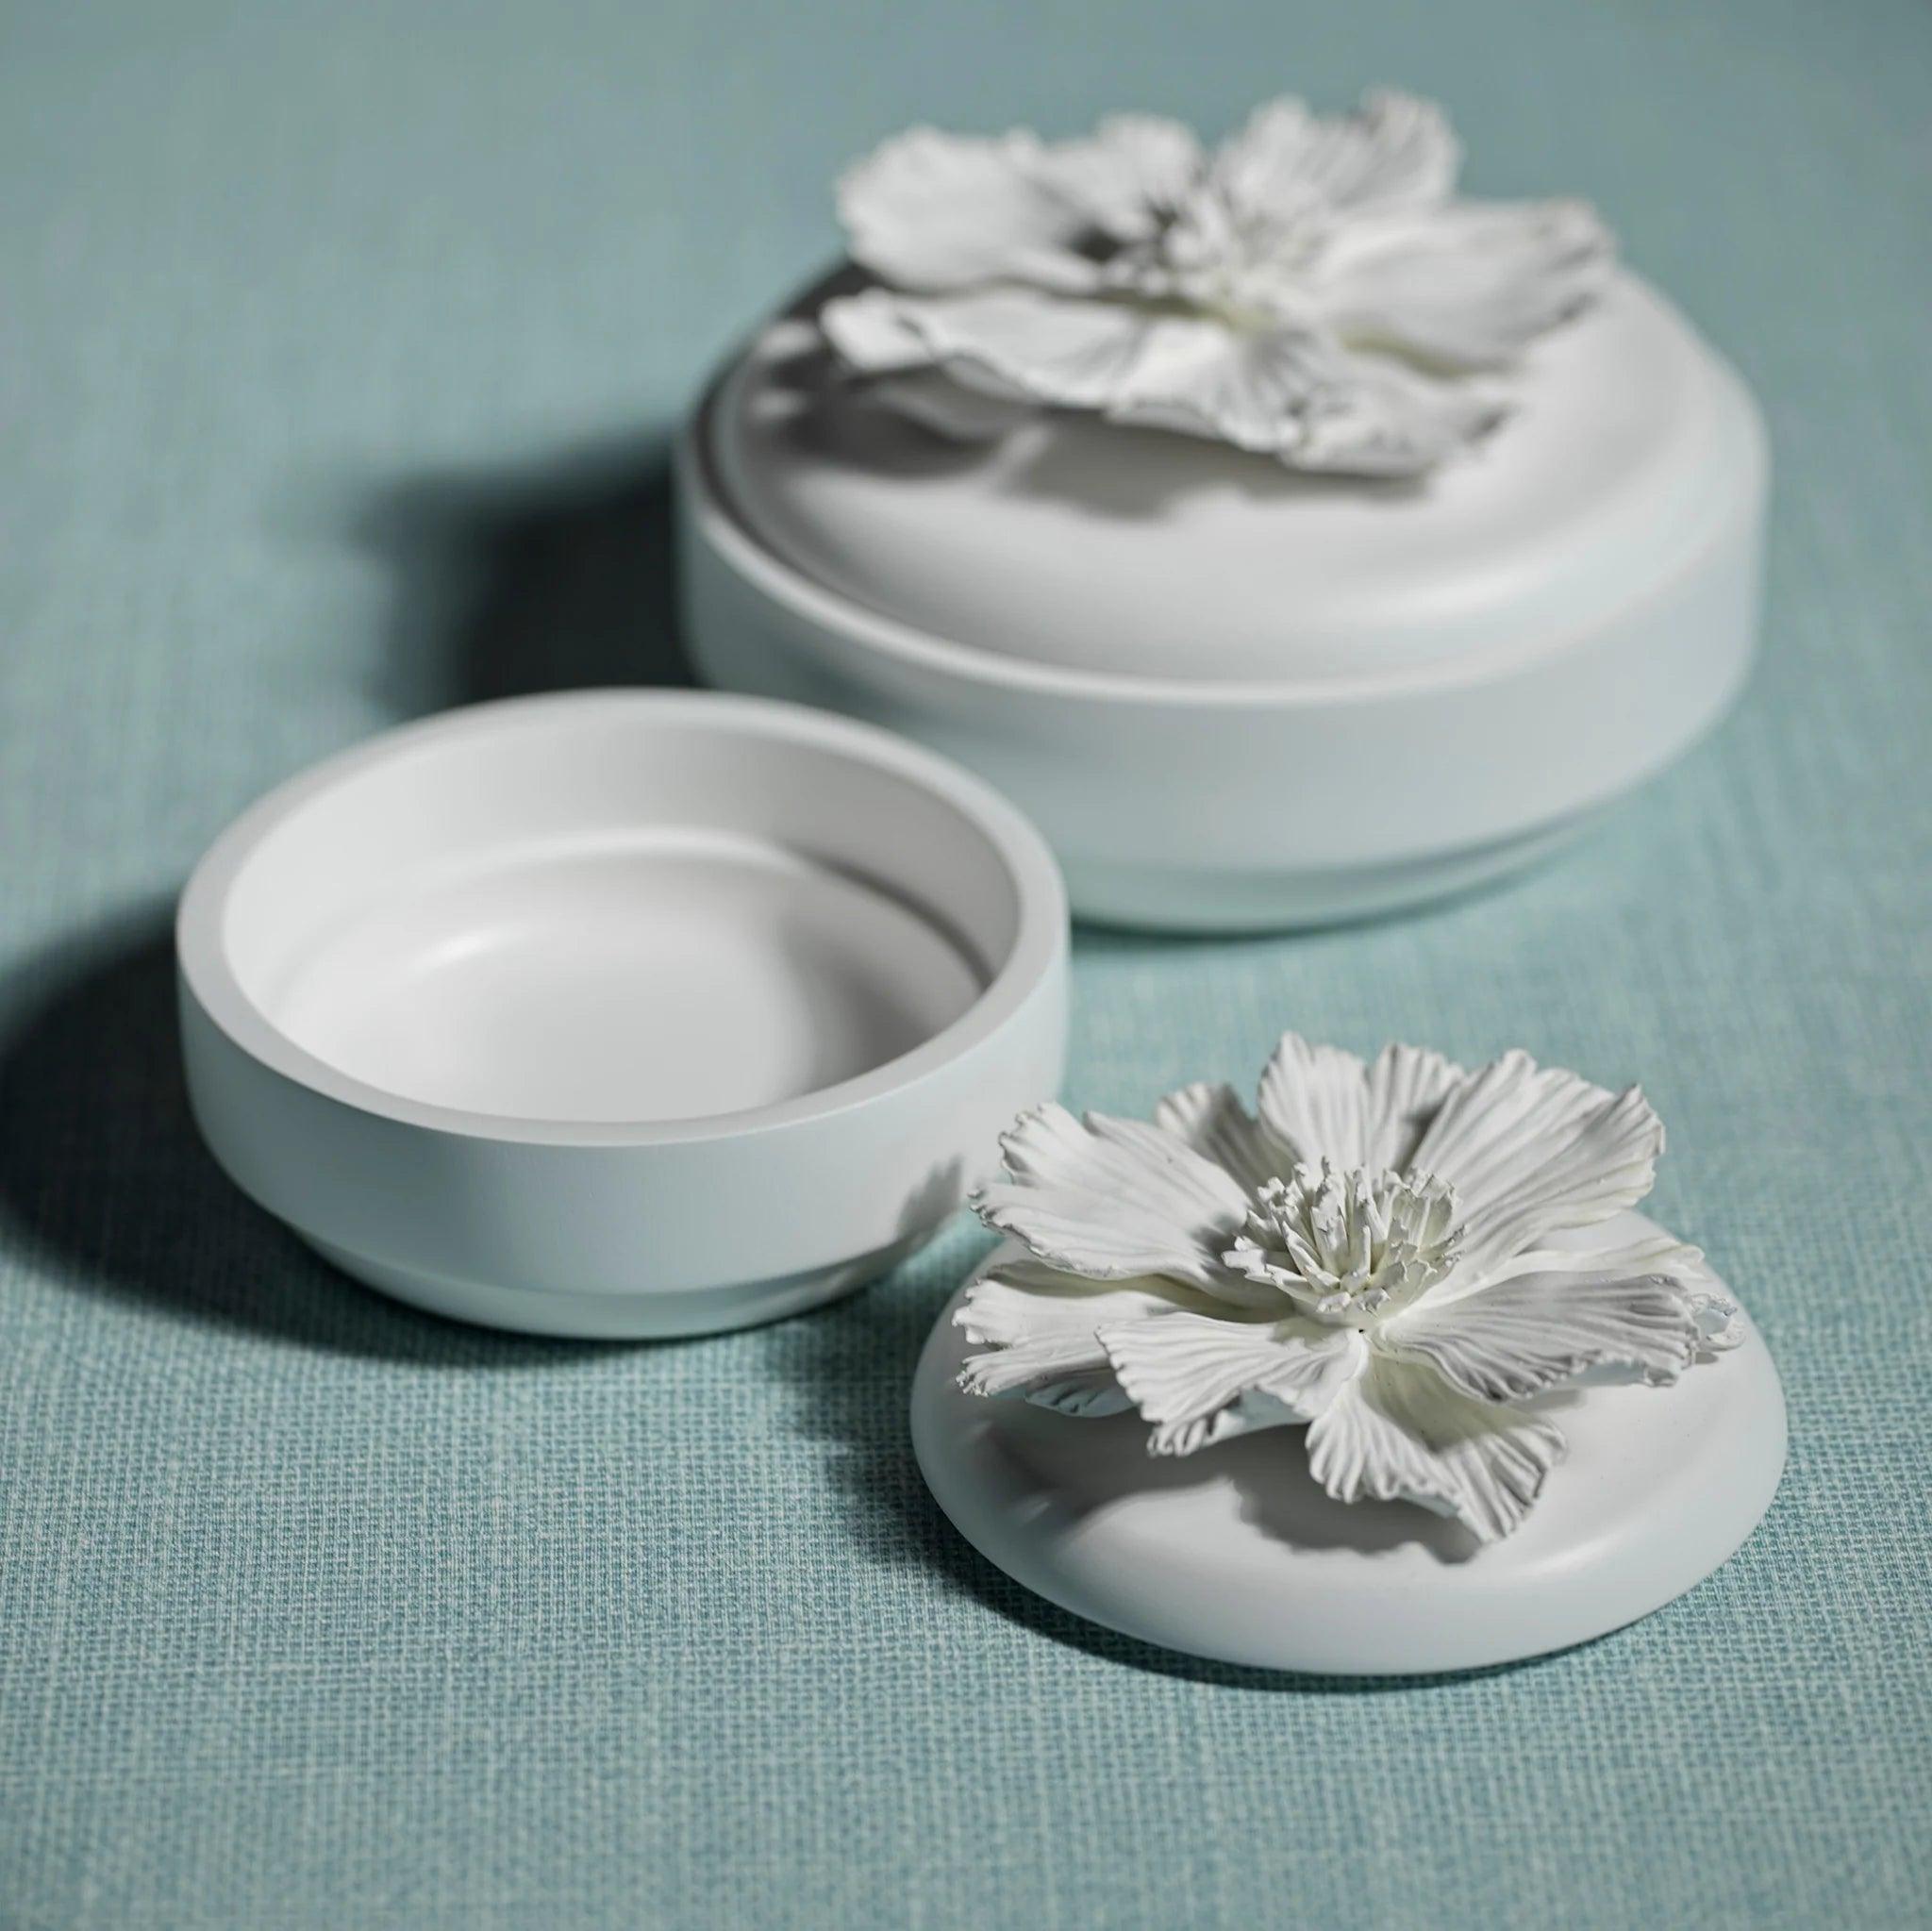 Blanchefleur All White Wood and Porcelain Box - Small - Elegant Linen